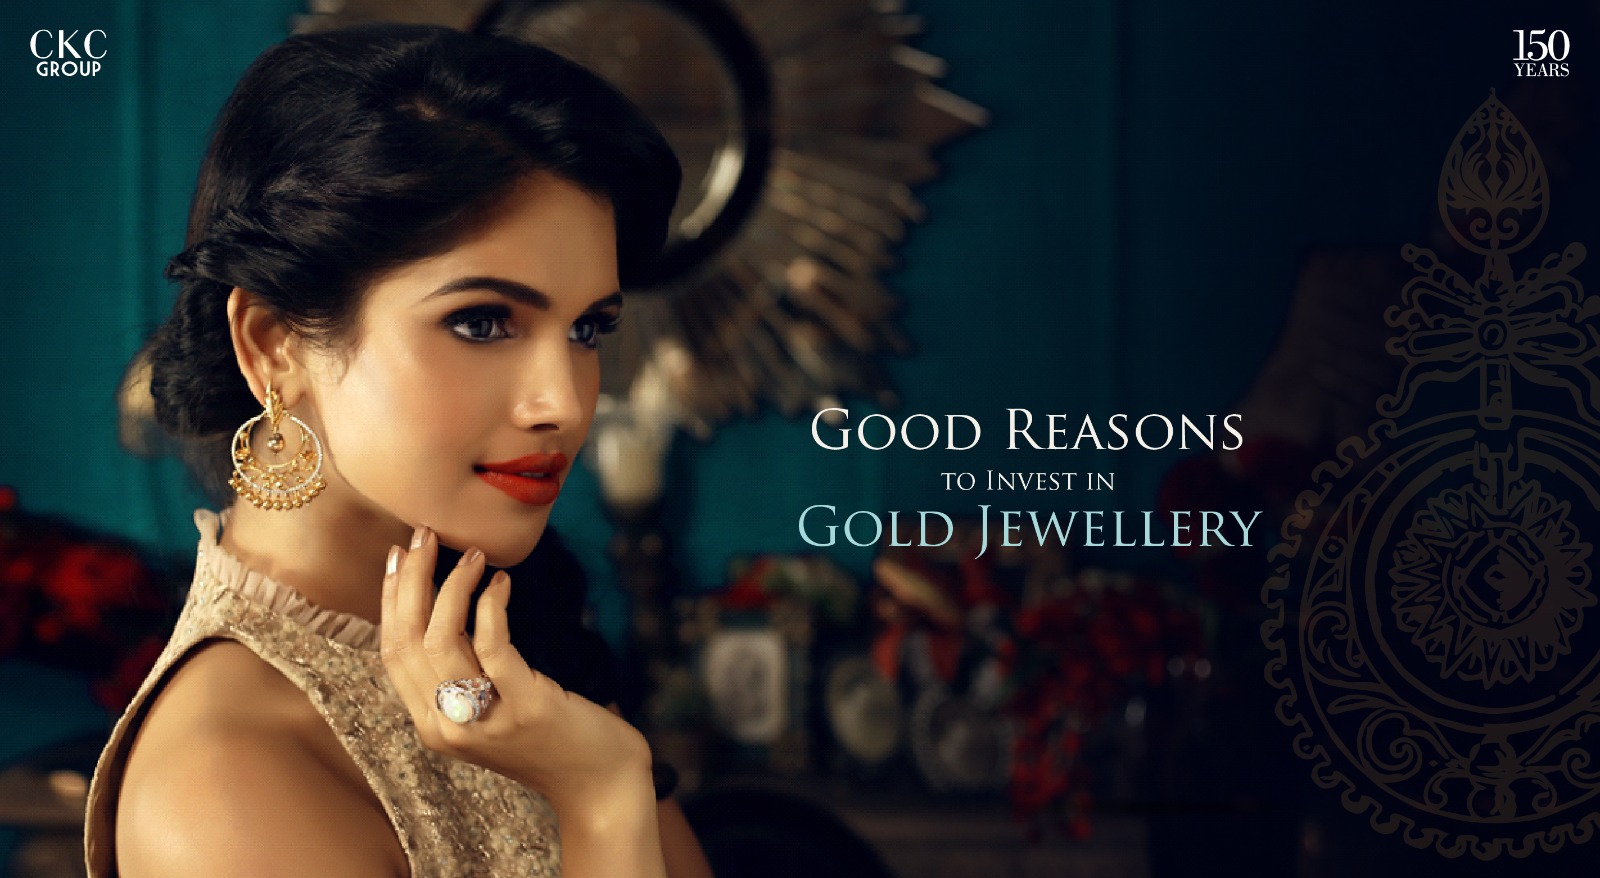 Good Reasons to Invest in Gold